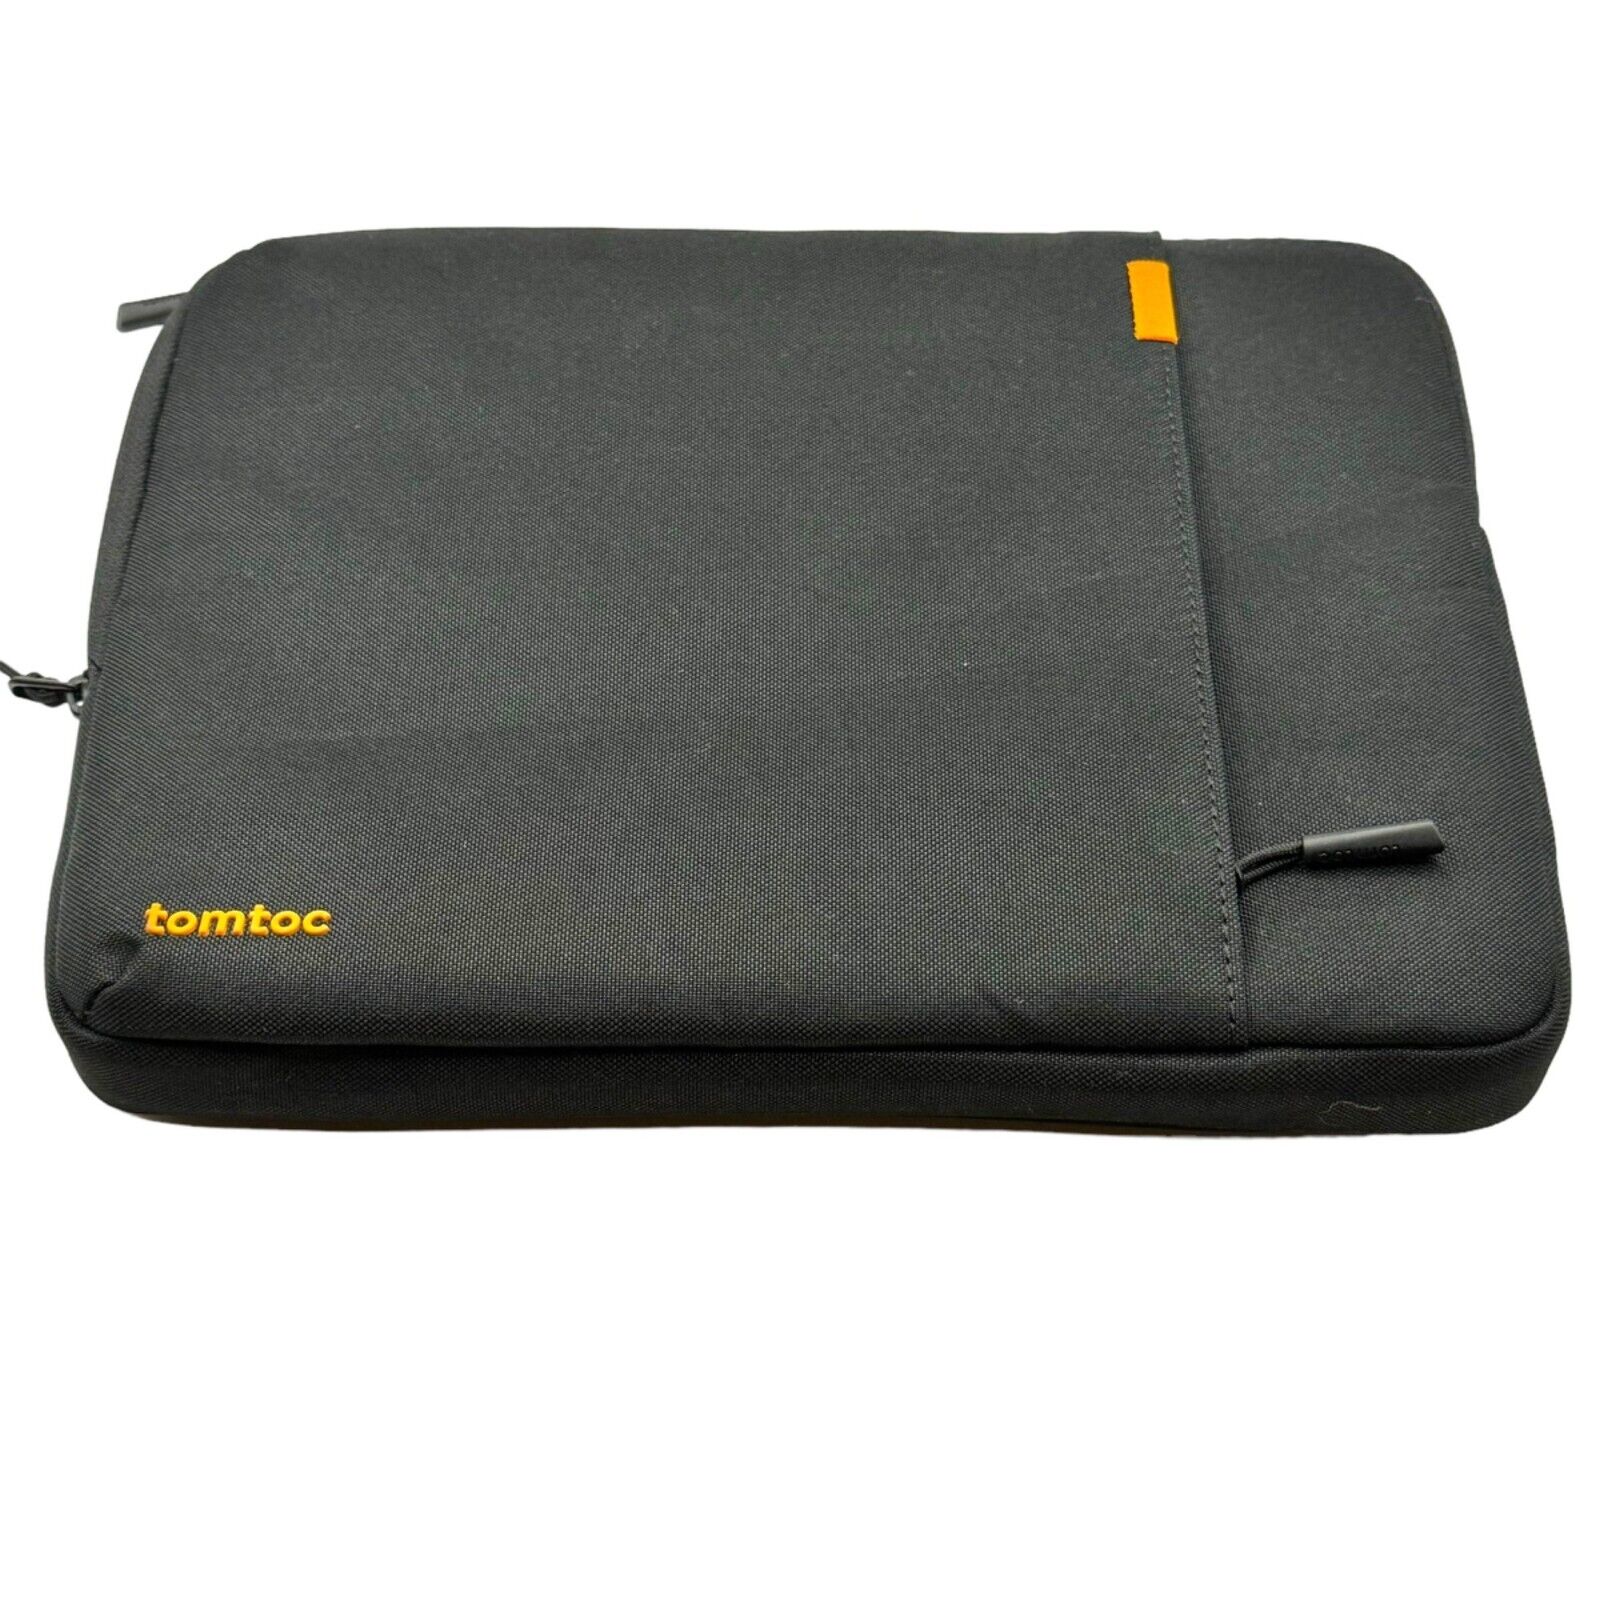 Tomtoc 15.6 Inch Laptop Sleeve - Durable, Protective, and Water-Resistant Case